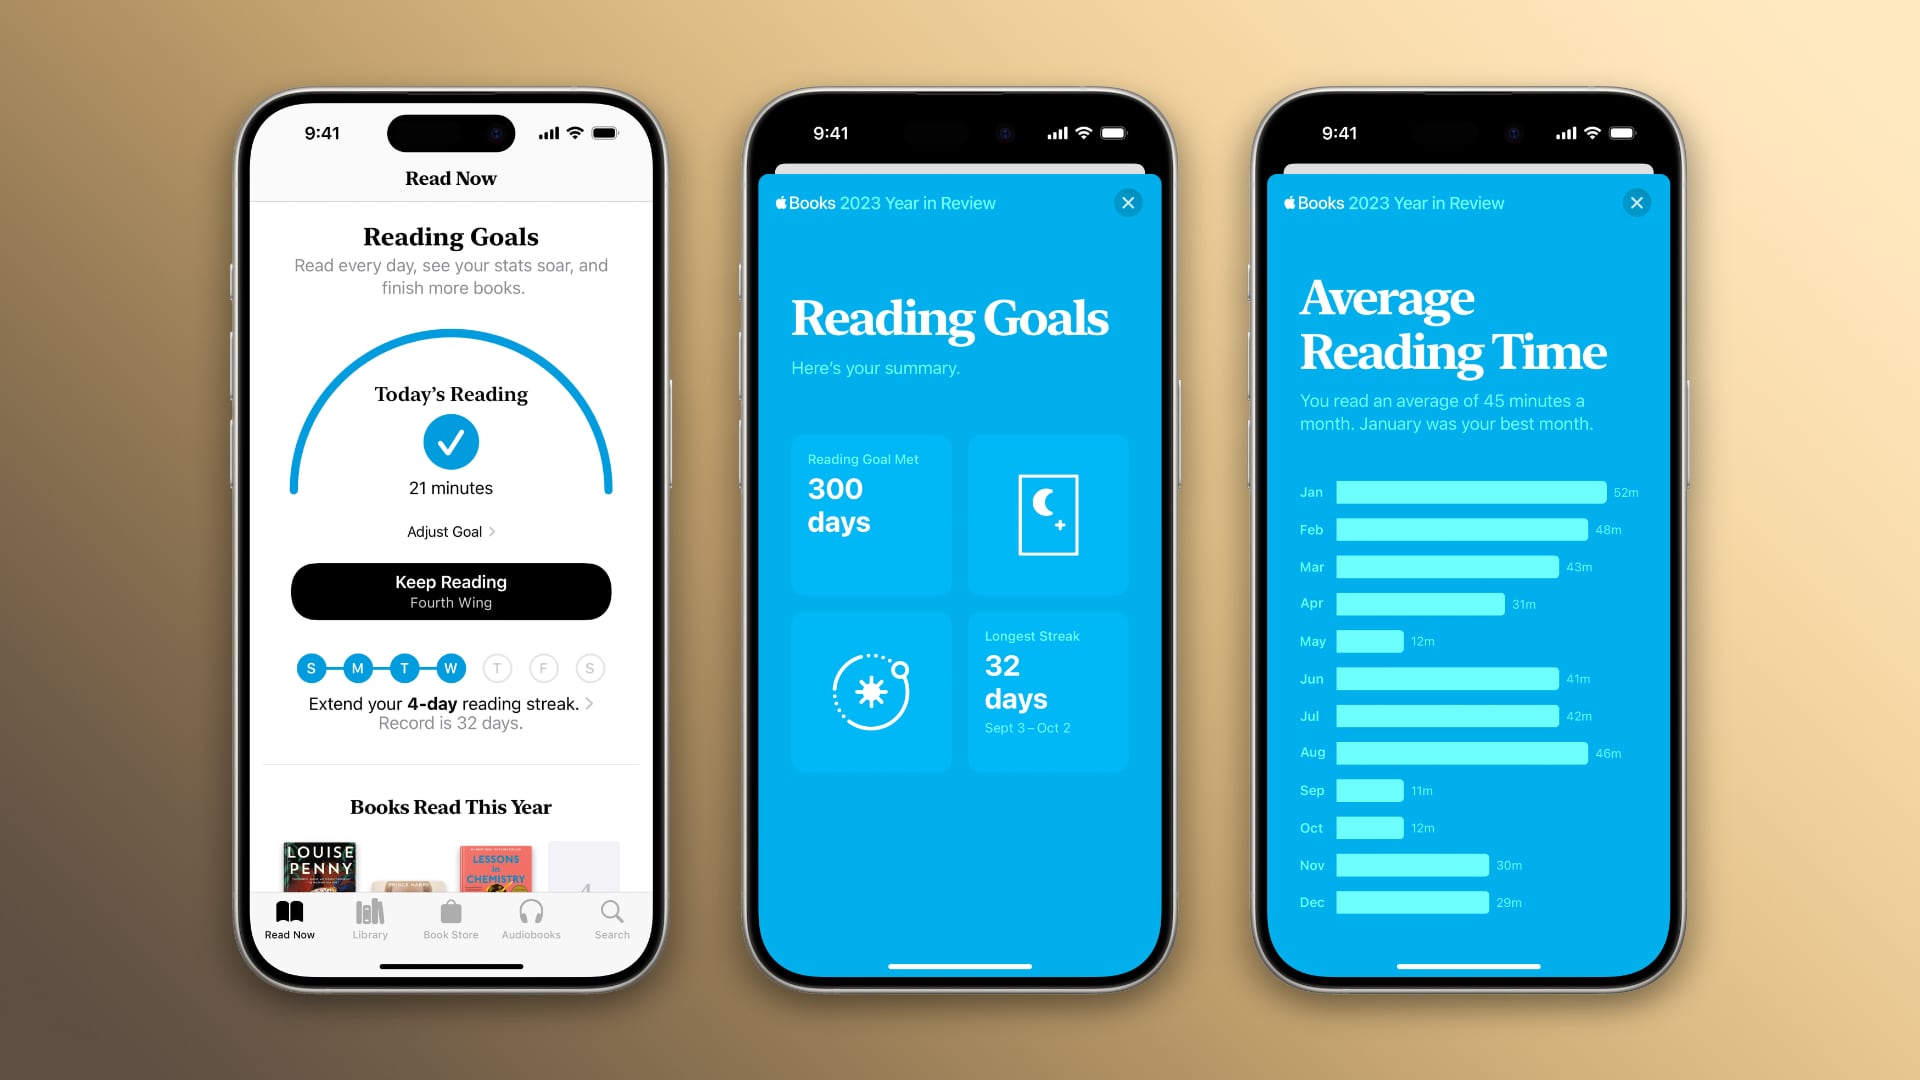 Reading goals summary in Year in Review on Apple Books